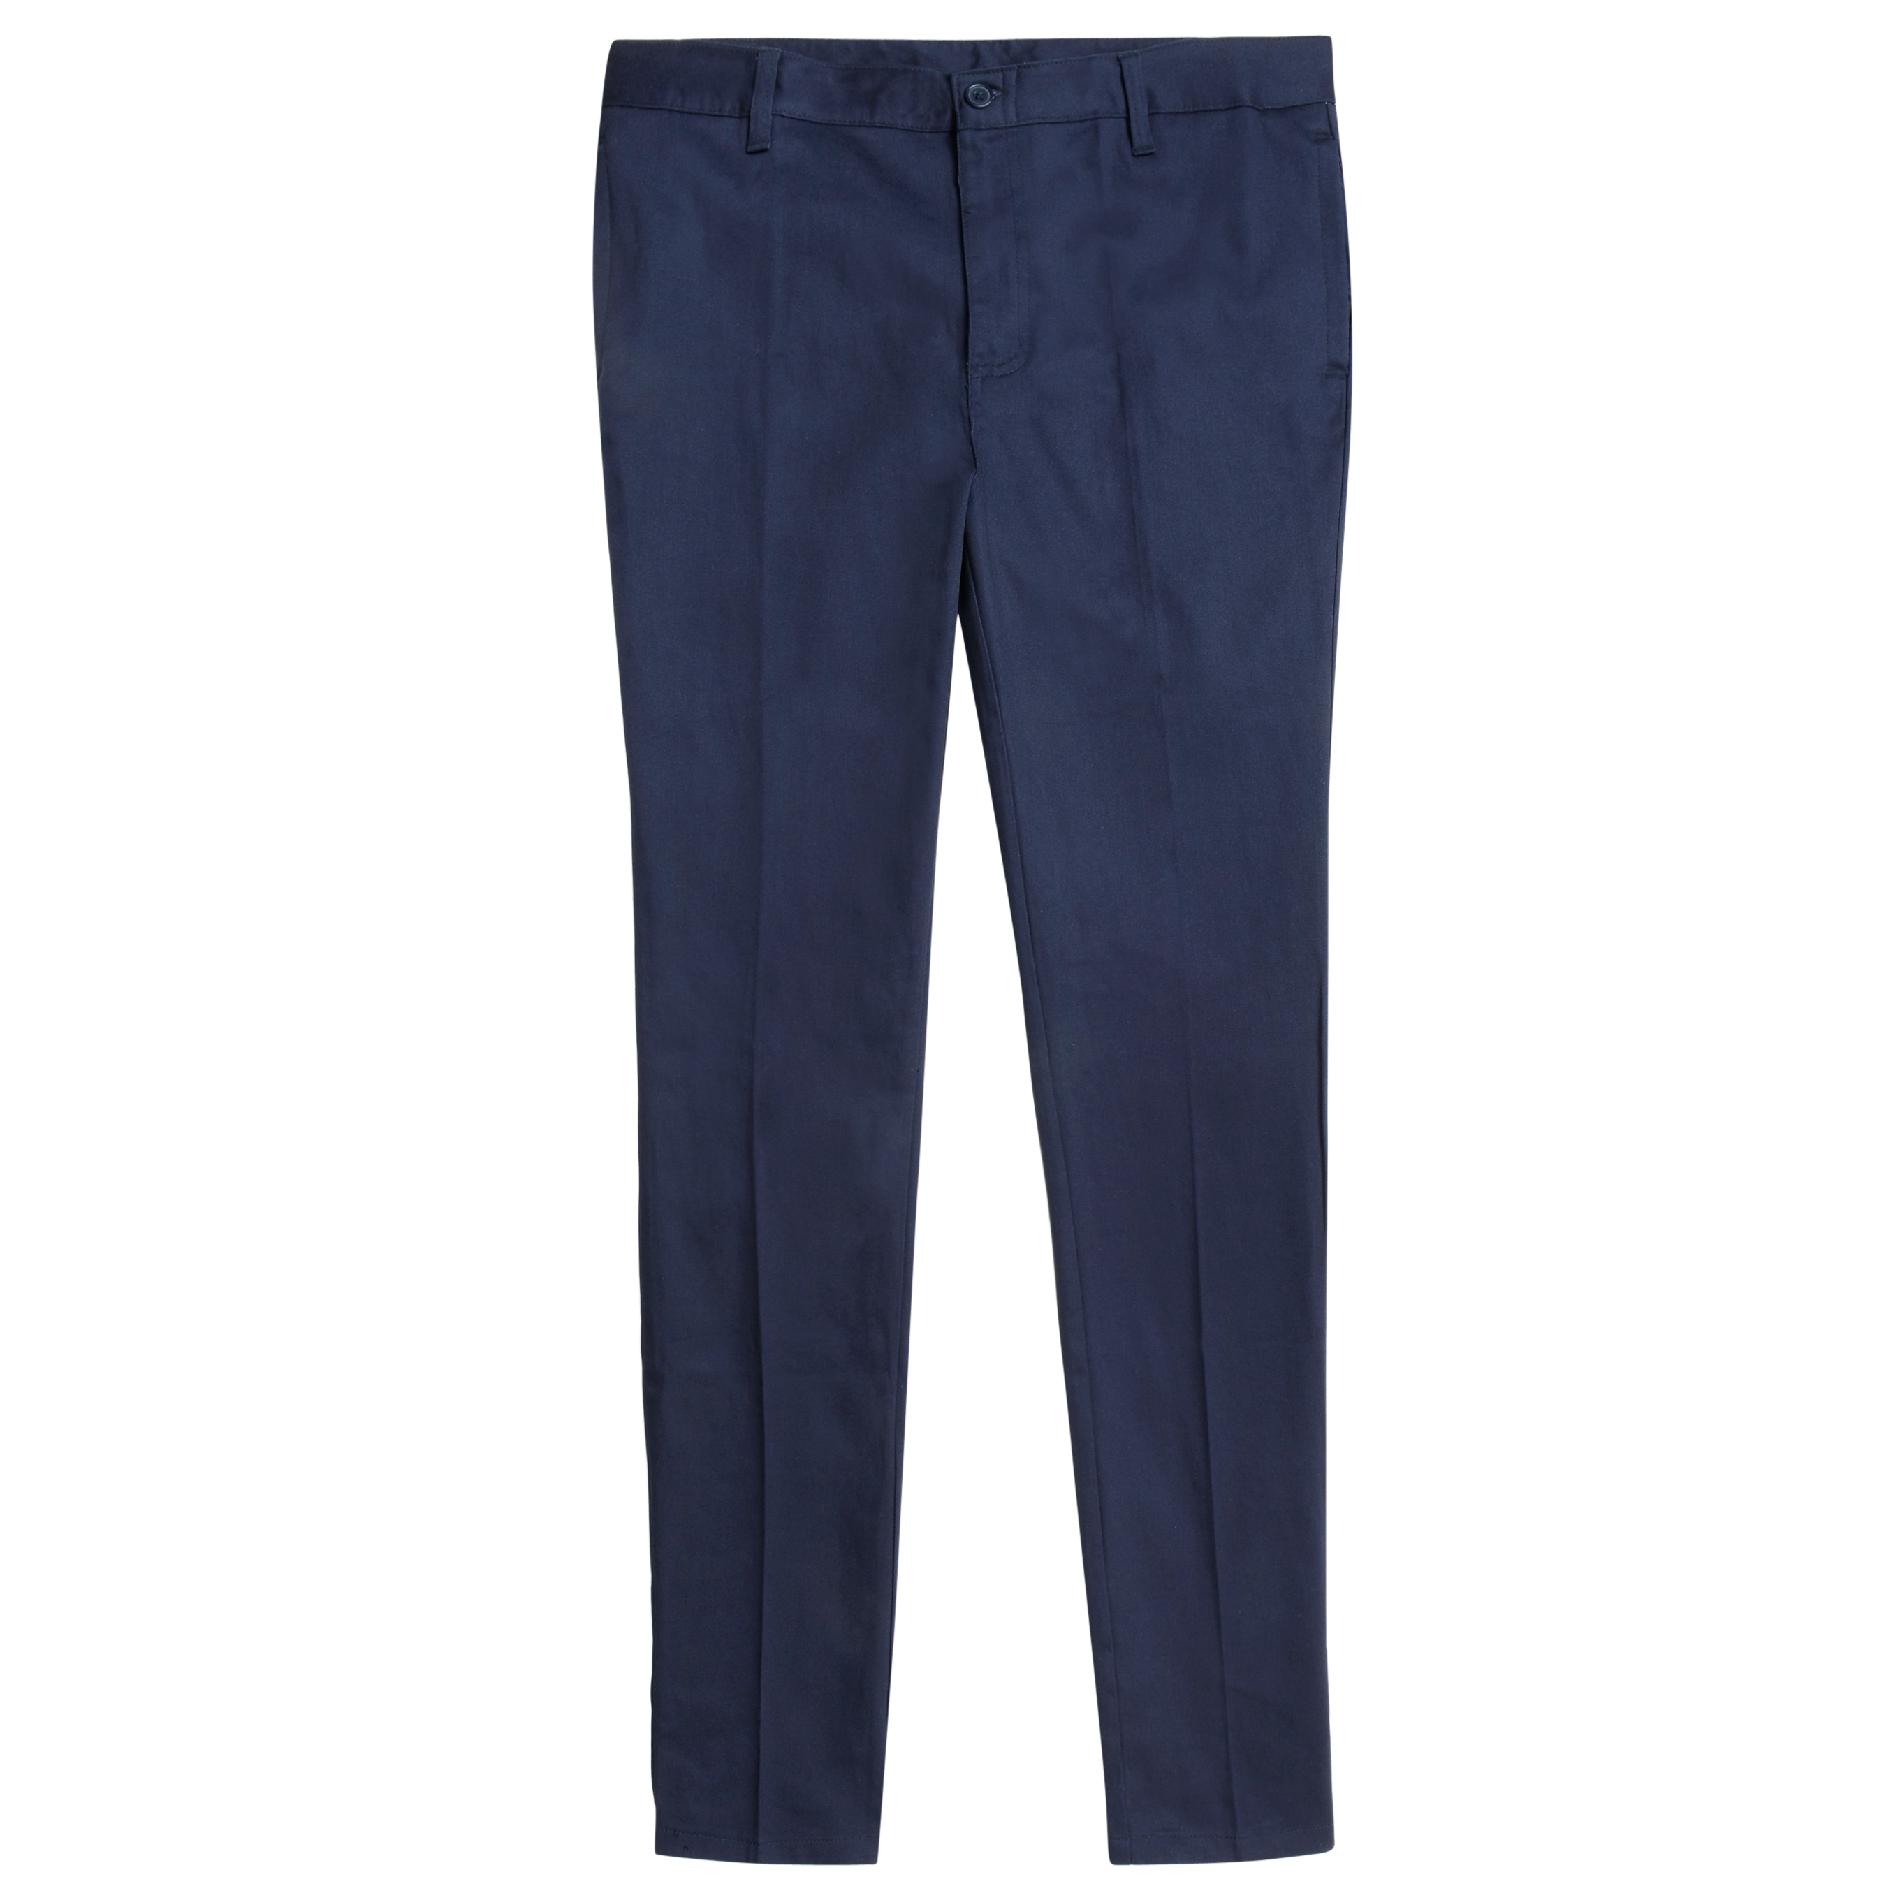 At School by French Toast Juniors Skinny Stretch Twill Pant